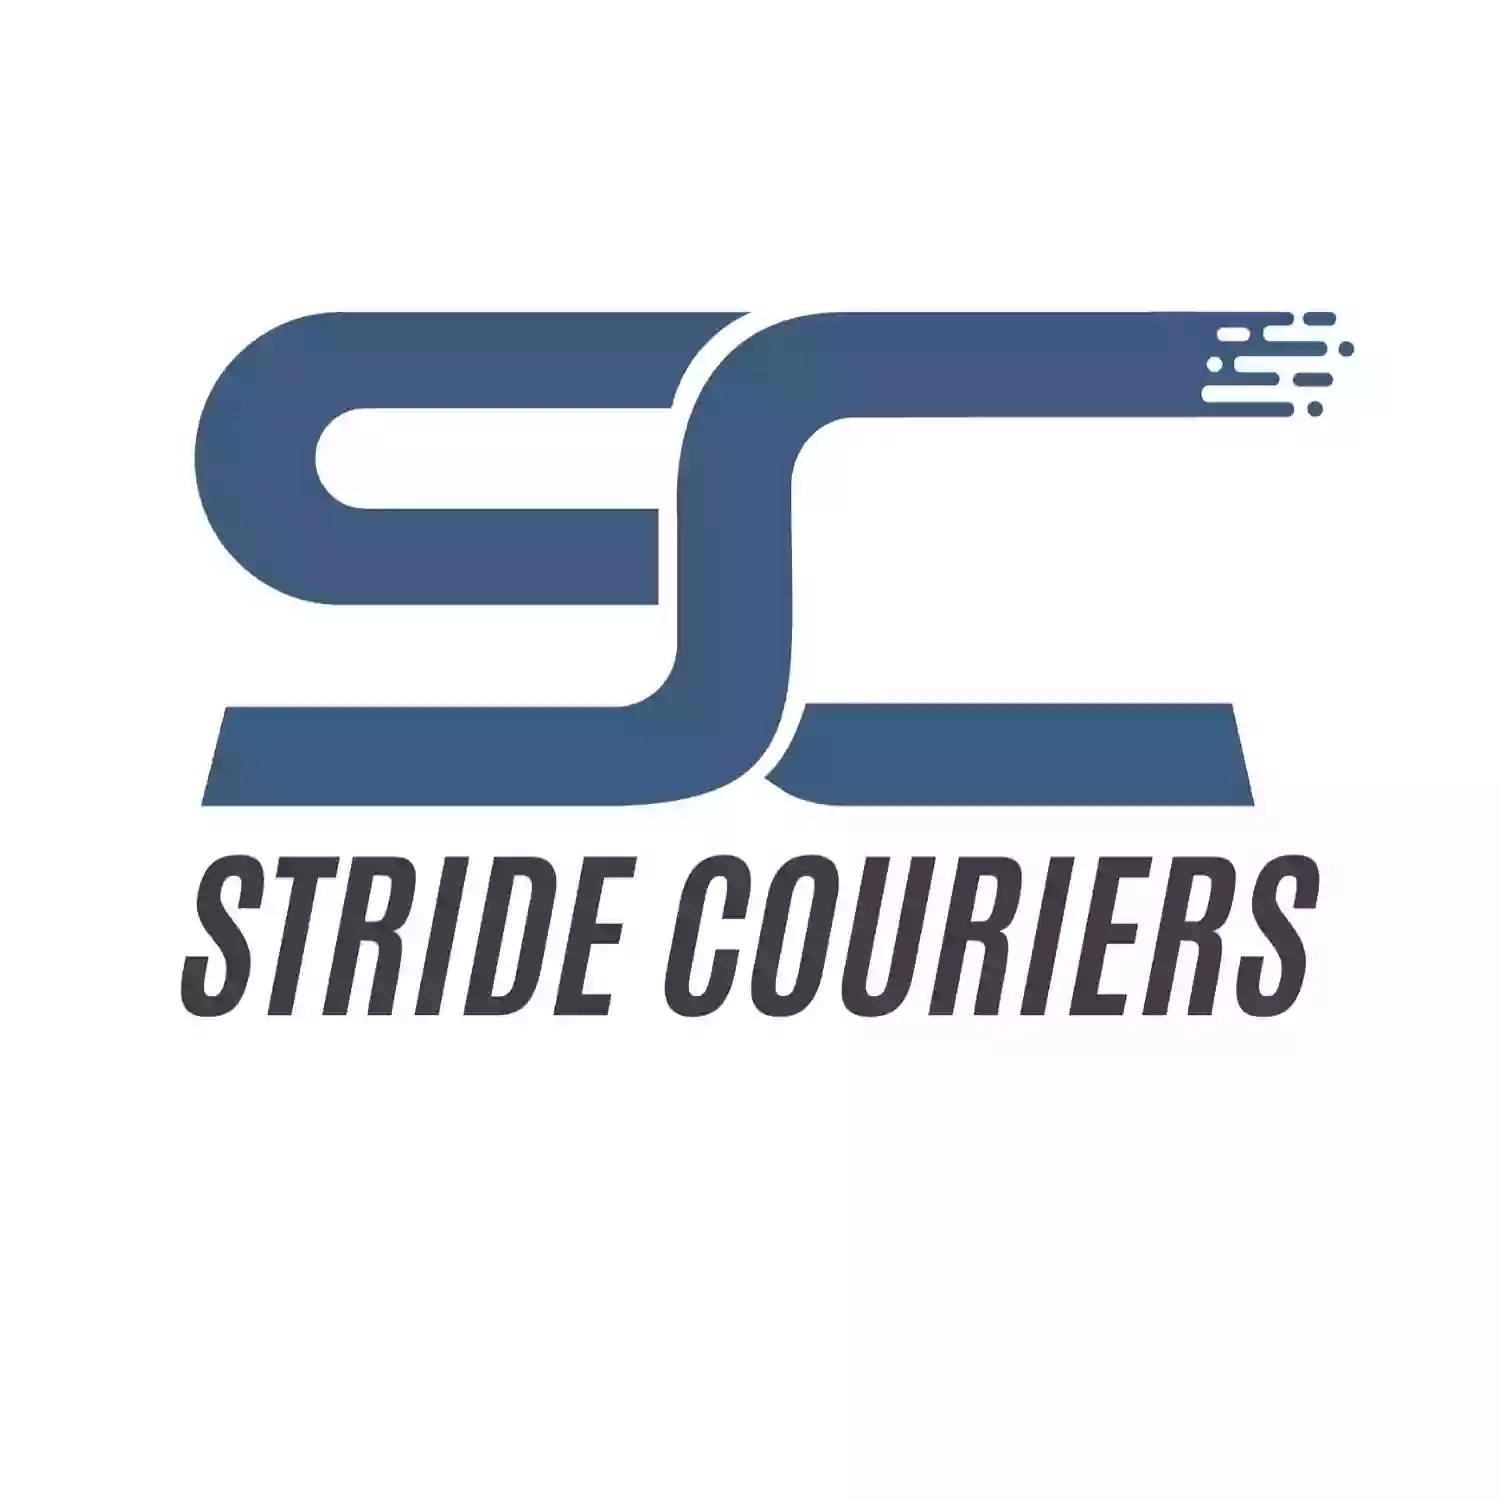 Stride Couriers - UK Same Day Couriers, Transport & Logistics